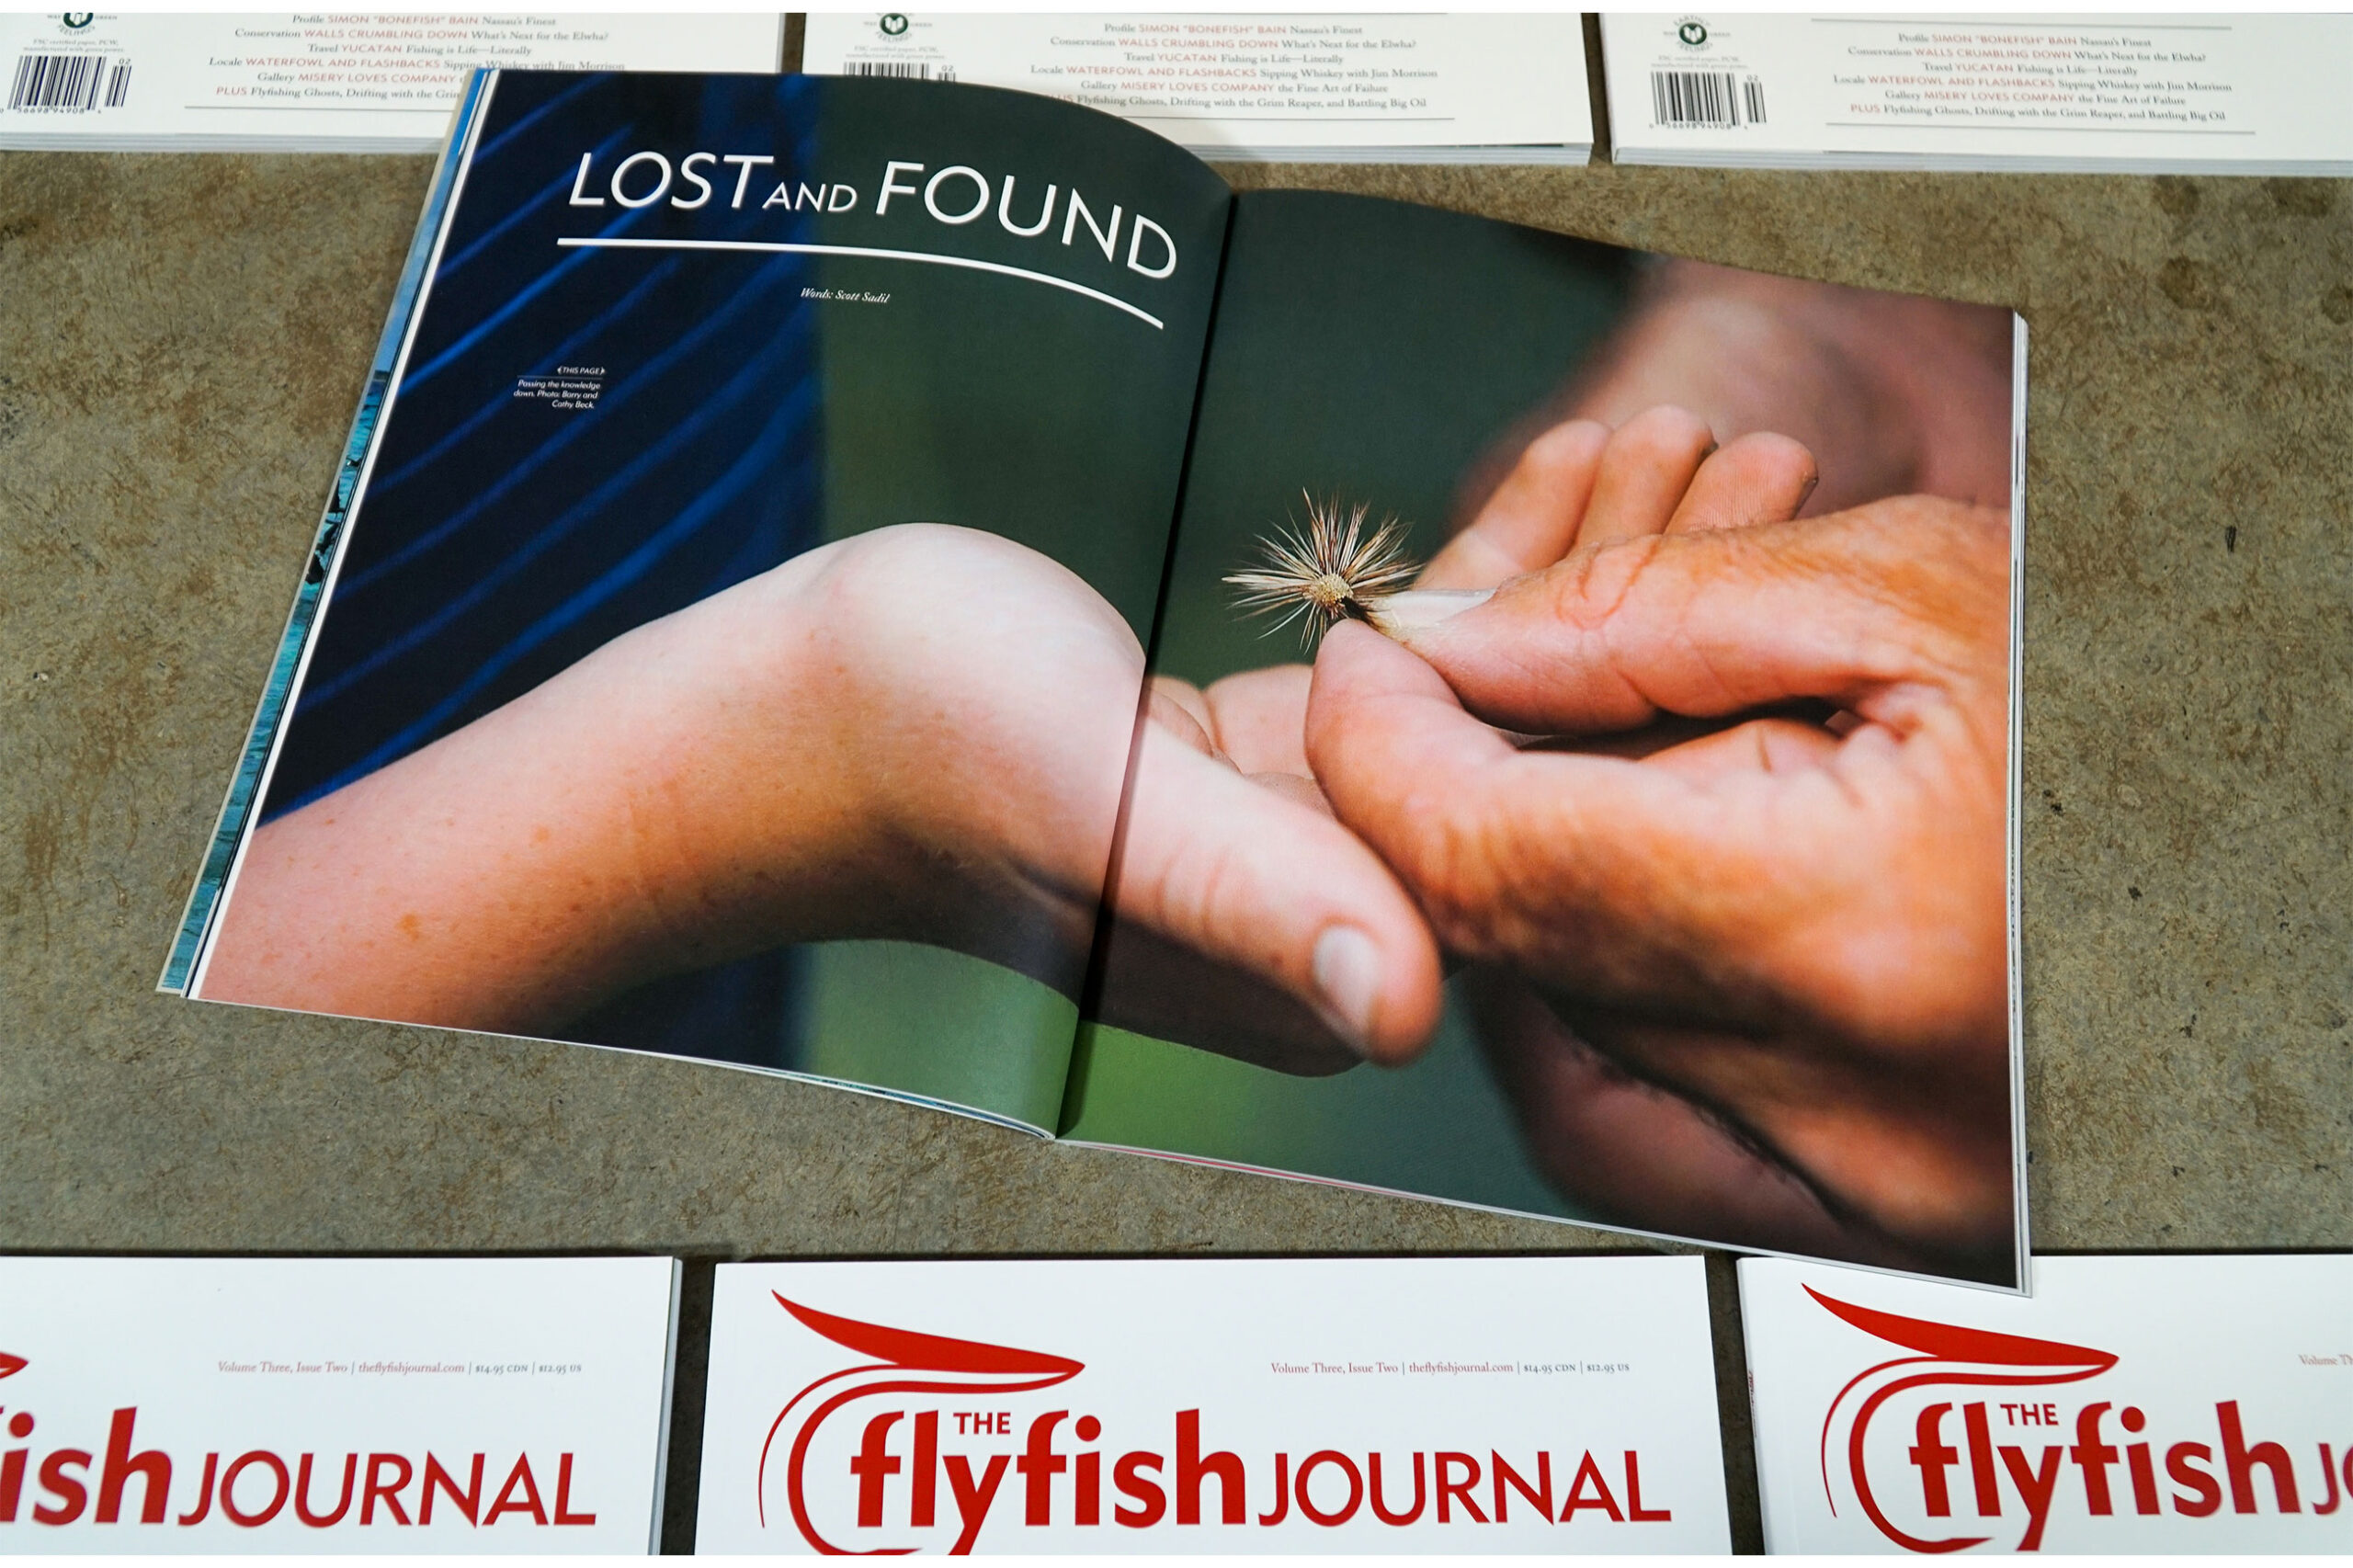 The Flyfish Journal Volume 3 Issue 2 Feature Lost and Found